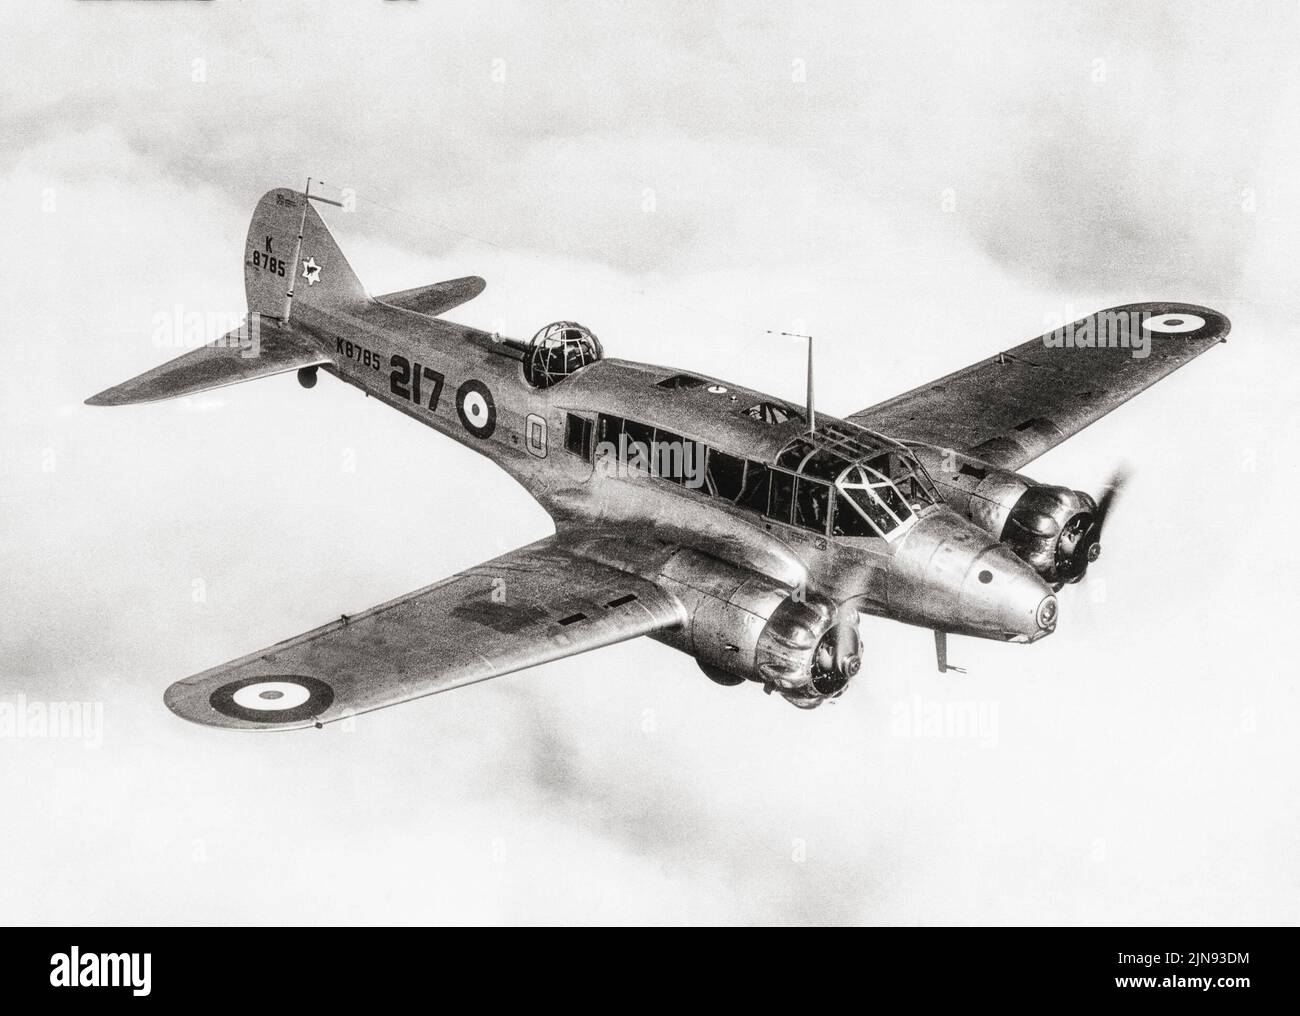 Avro Anson Mark 1  No.217 Squadron, in flight  in  1937. A British twin-engined, multi-role aircraft it went on to serve in a variety of roles for the Royal Air Force (RAF), Fleet Air Arm (FAA), Royal Canadian Air Force (RCAF) and numerous other air forces before, during, and after the Second World War. Stock Photo